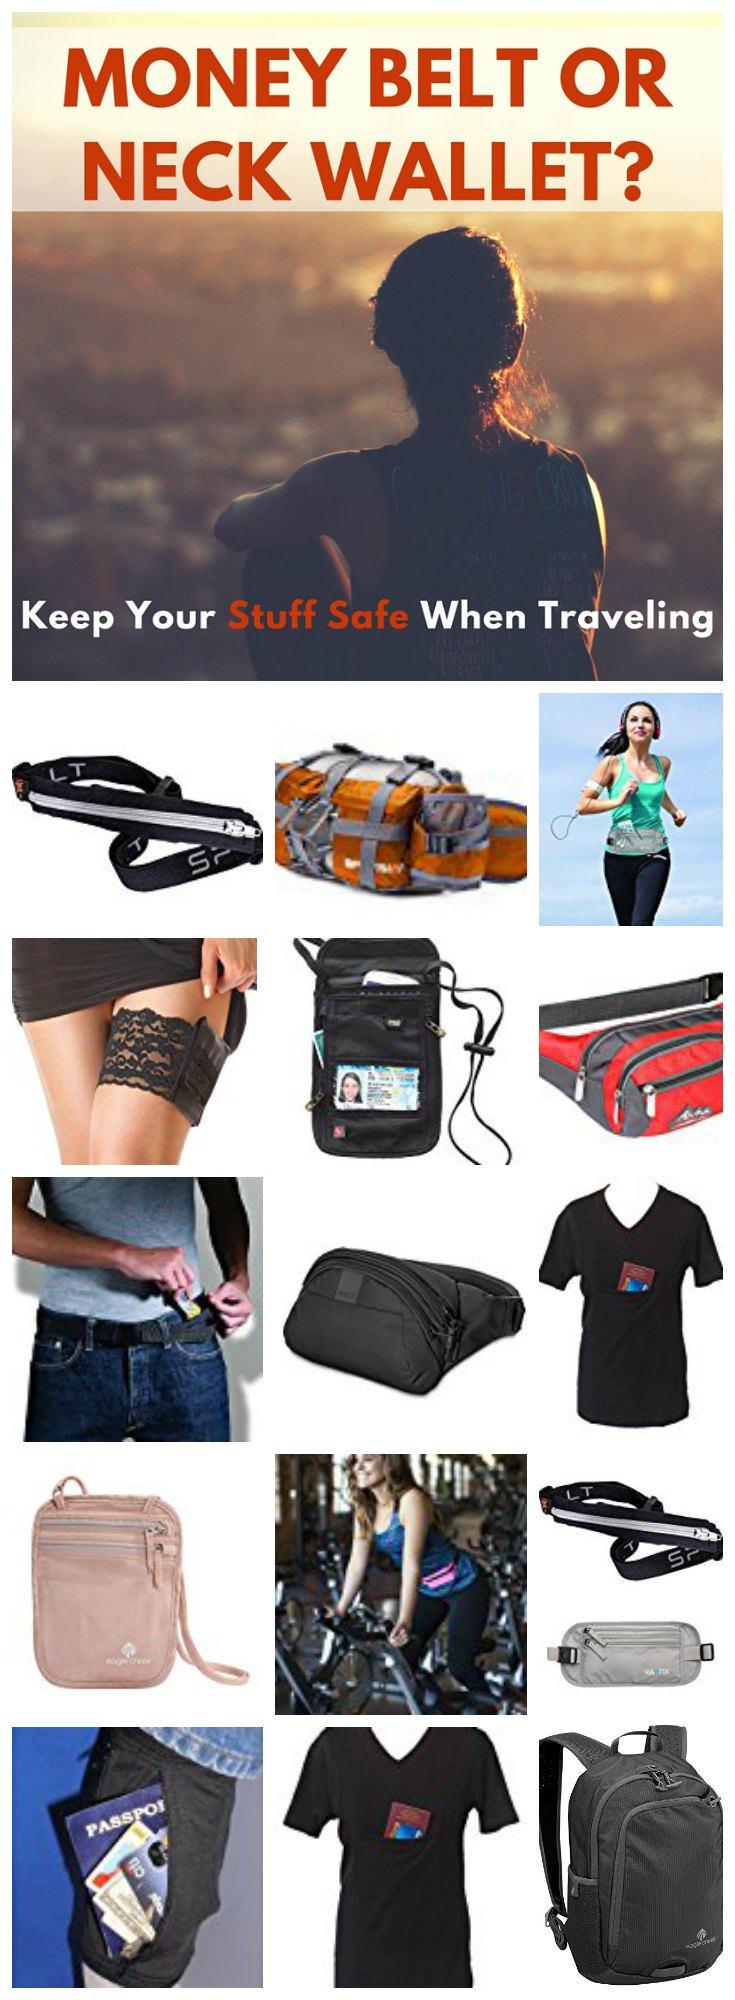 Money Belt or Neck Wallet? Reviews and Alternative to Keep Your